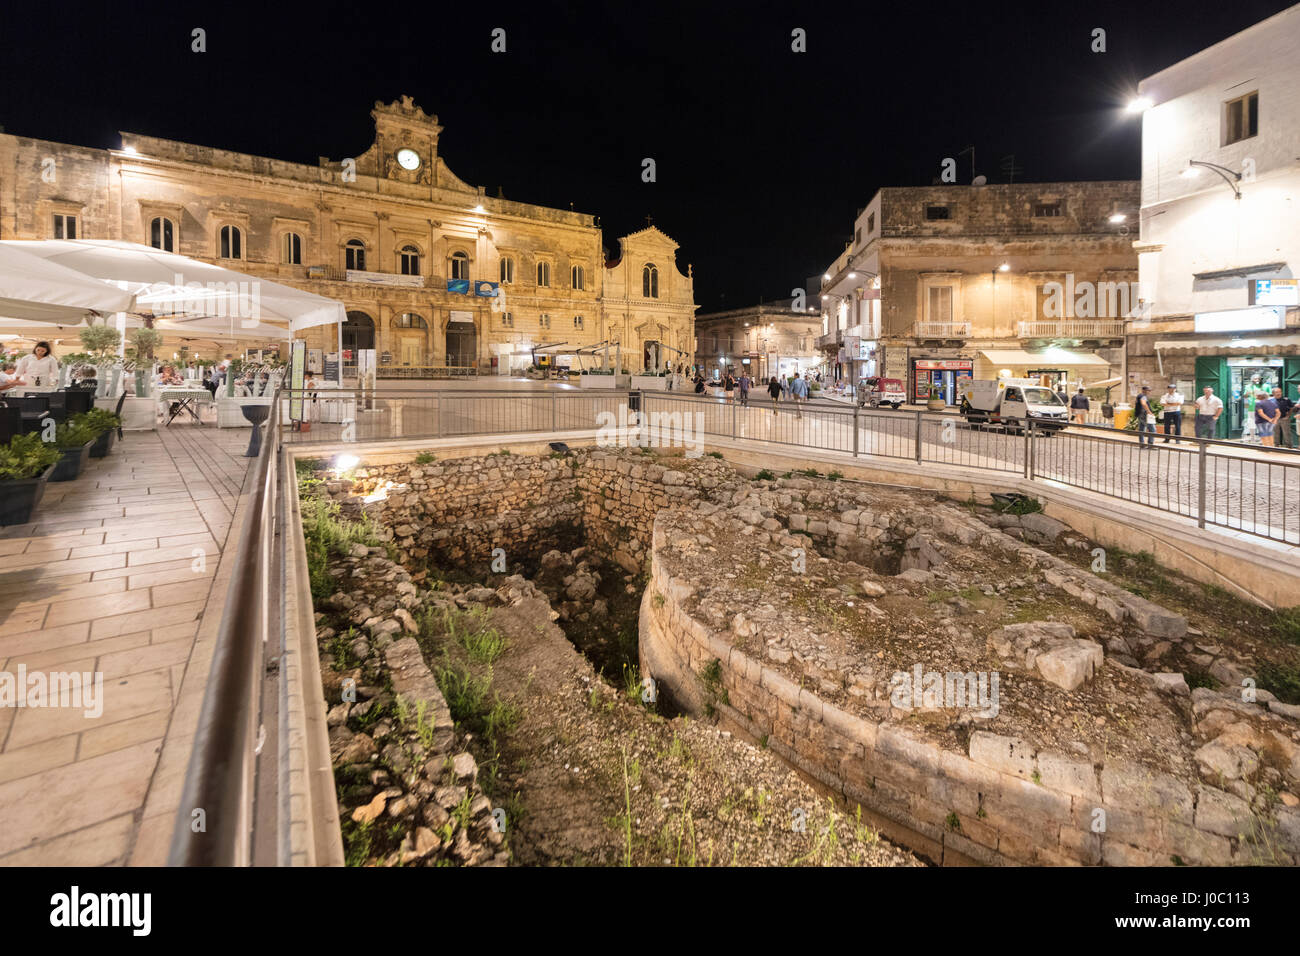 Night view of the Town Hall and ancient ruins in the medieval old town of Ostuni, Province of Brindisi, Apulia, Italy Stock Photo